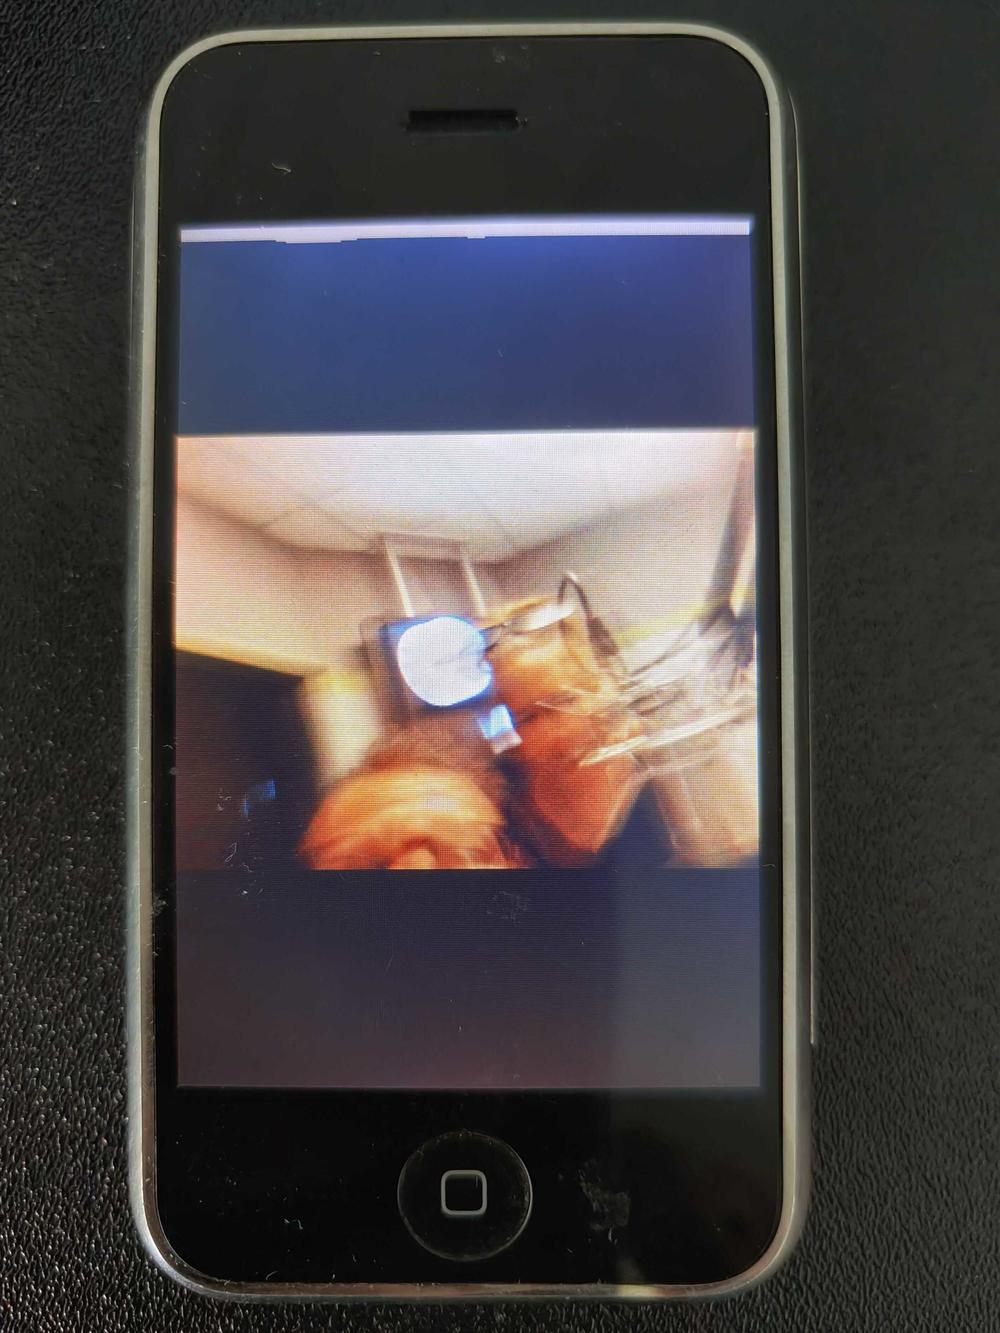 NPR's Josh Rogosin and Leila Fadel attempted to take a selfie with the original iPhone.